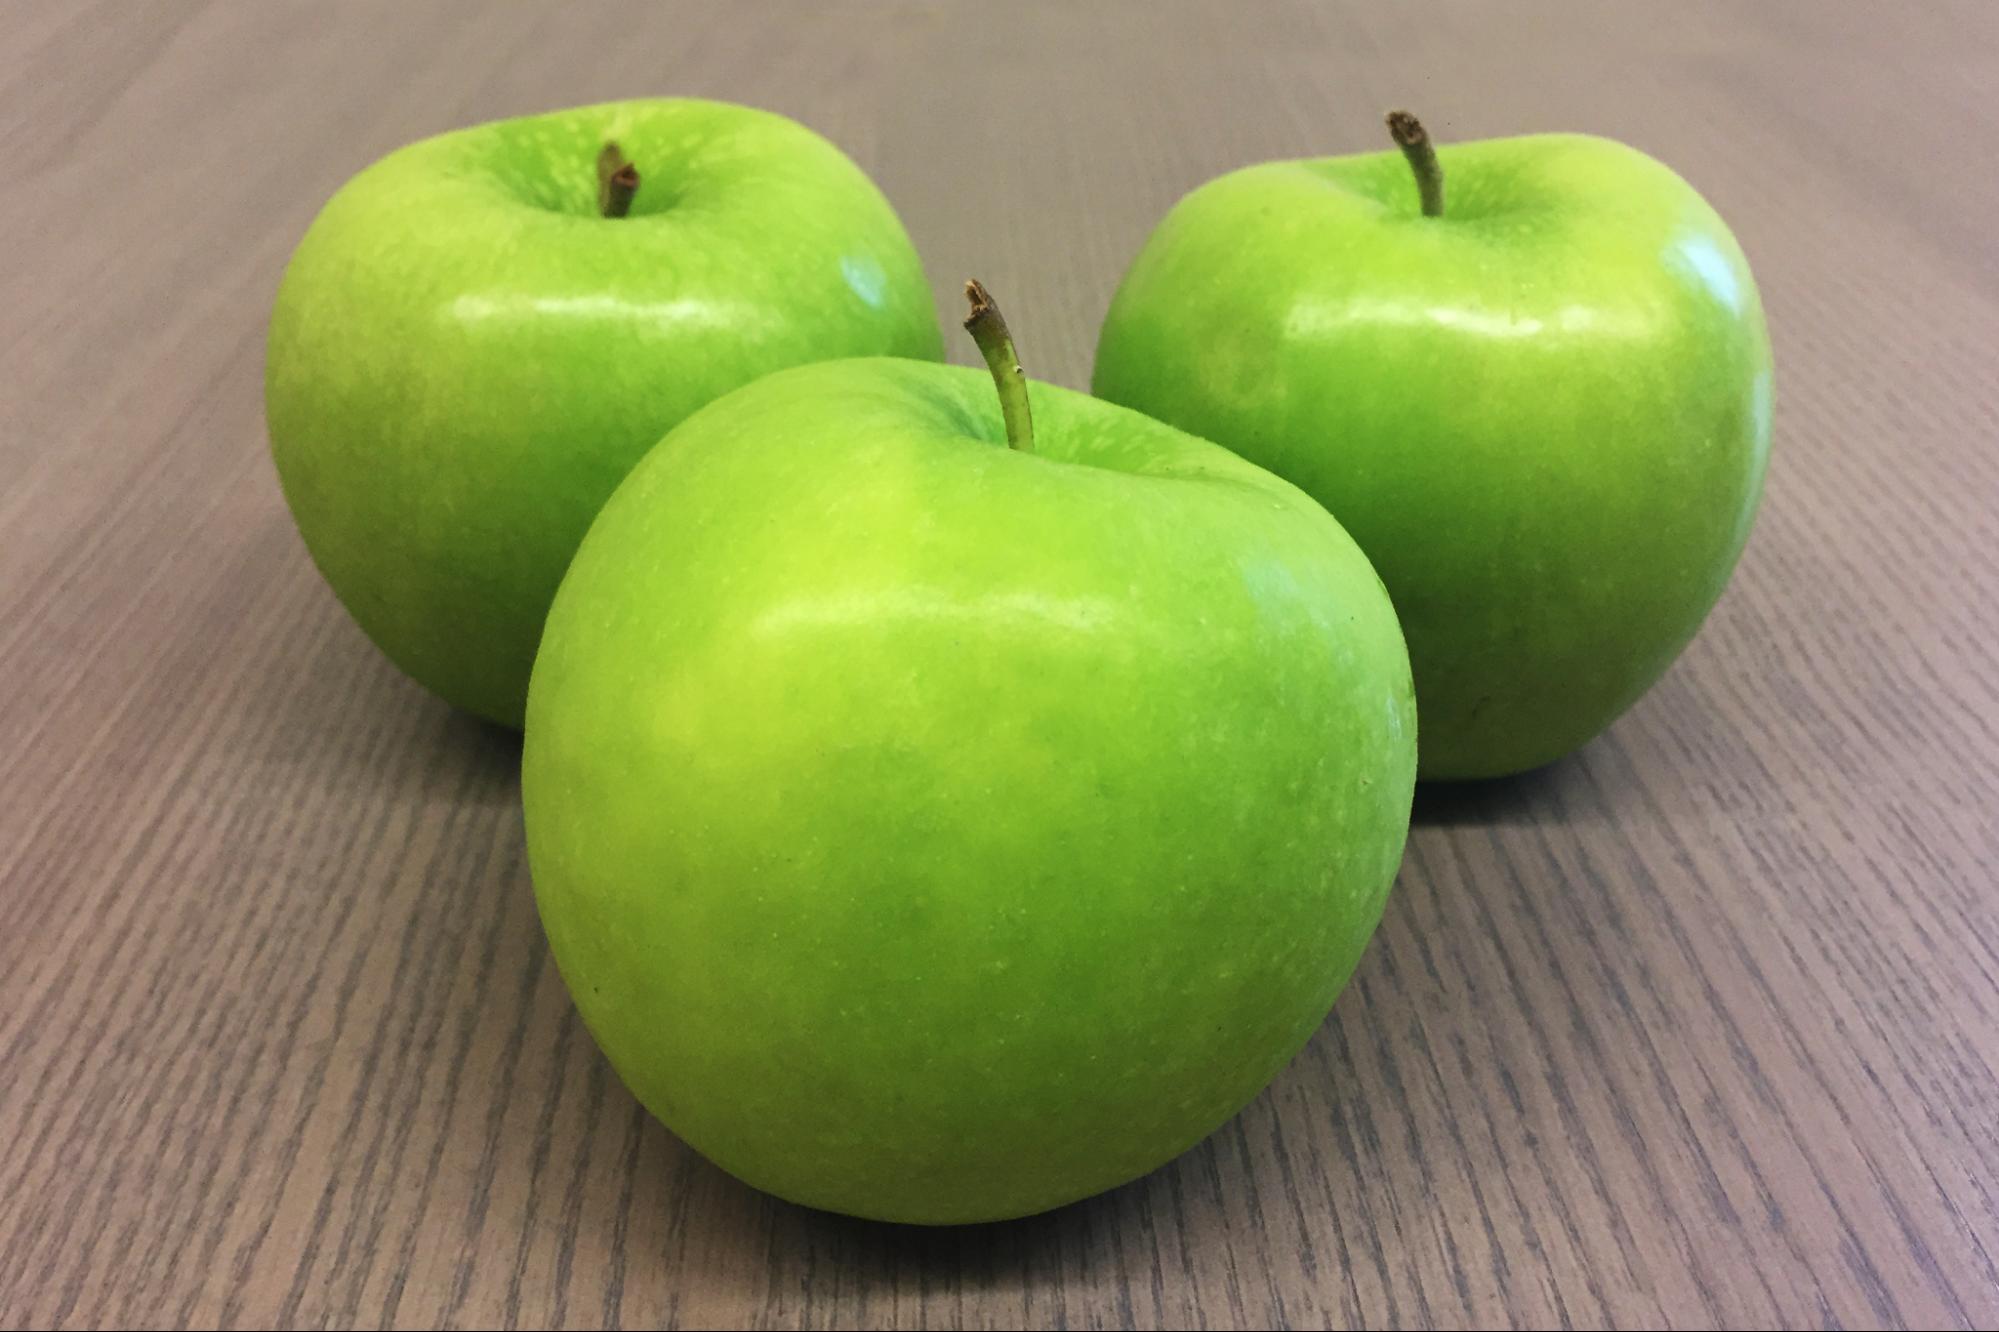 Granny smith is a common variety of green apples.